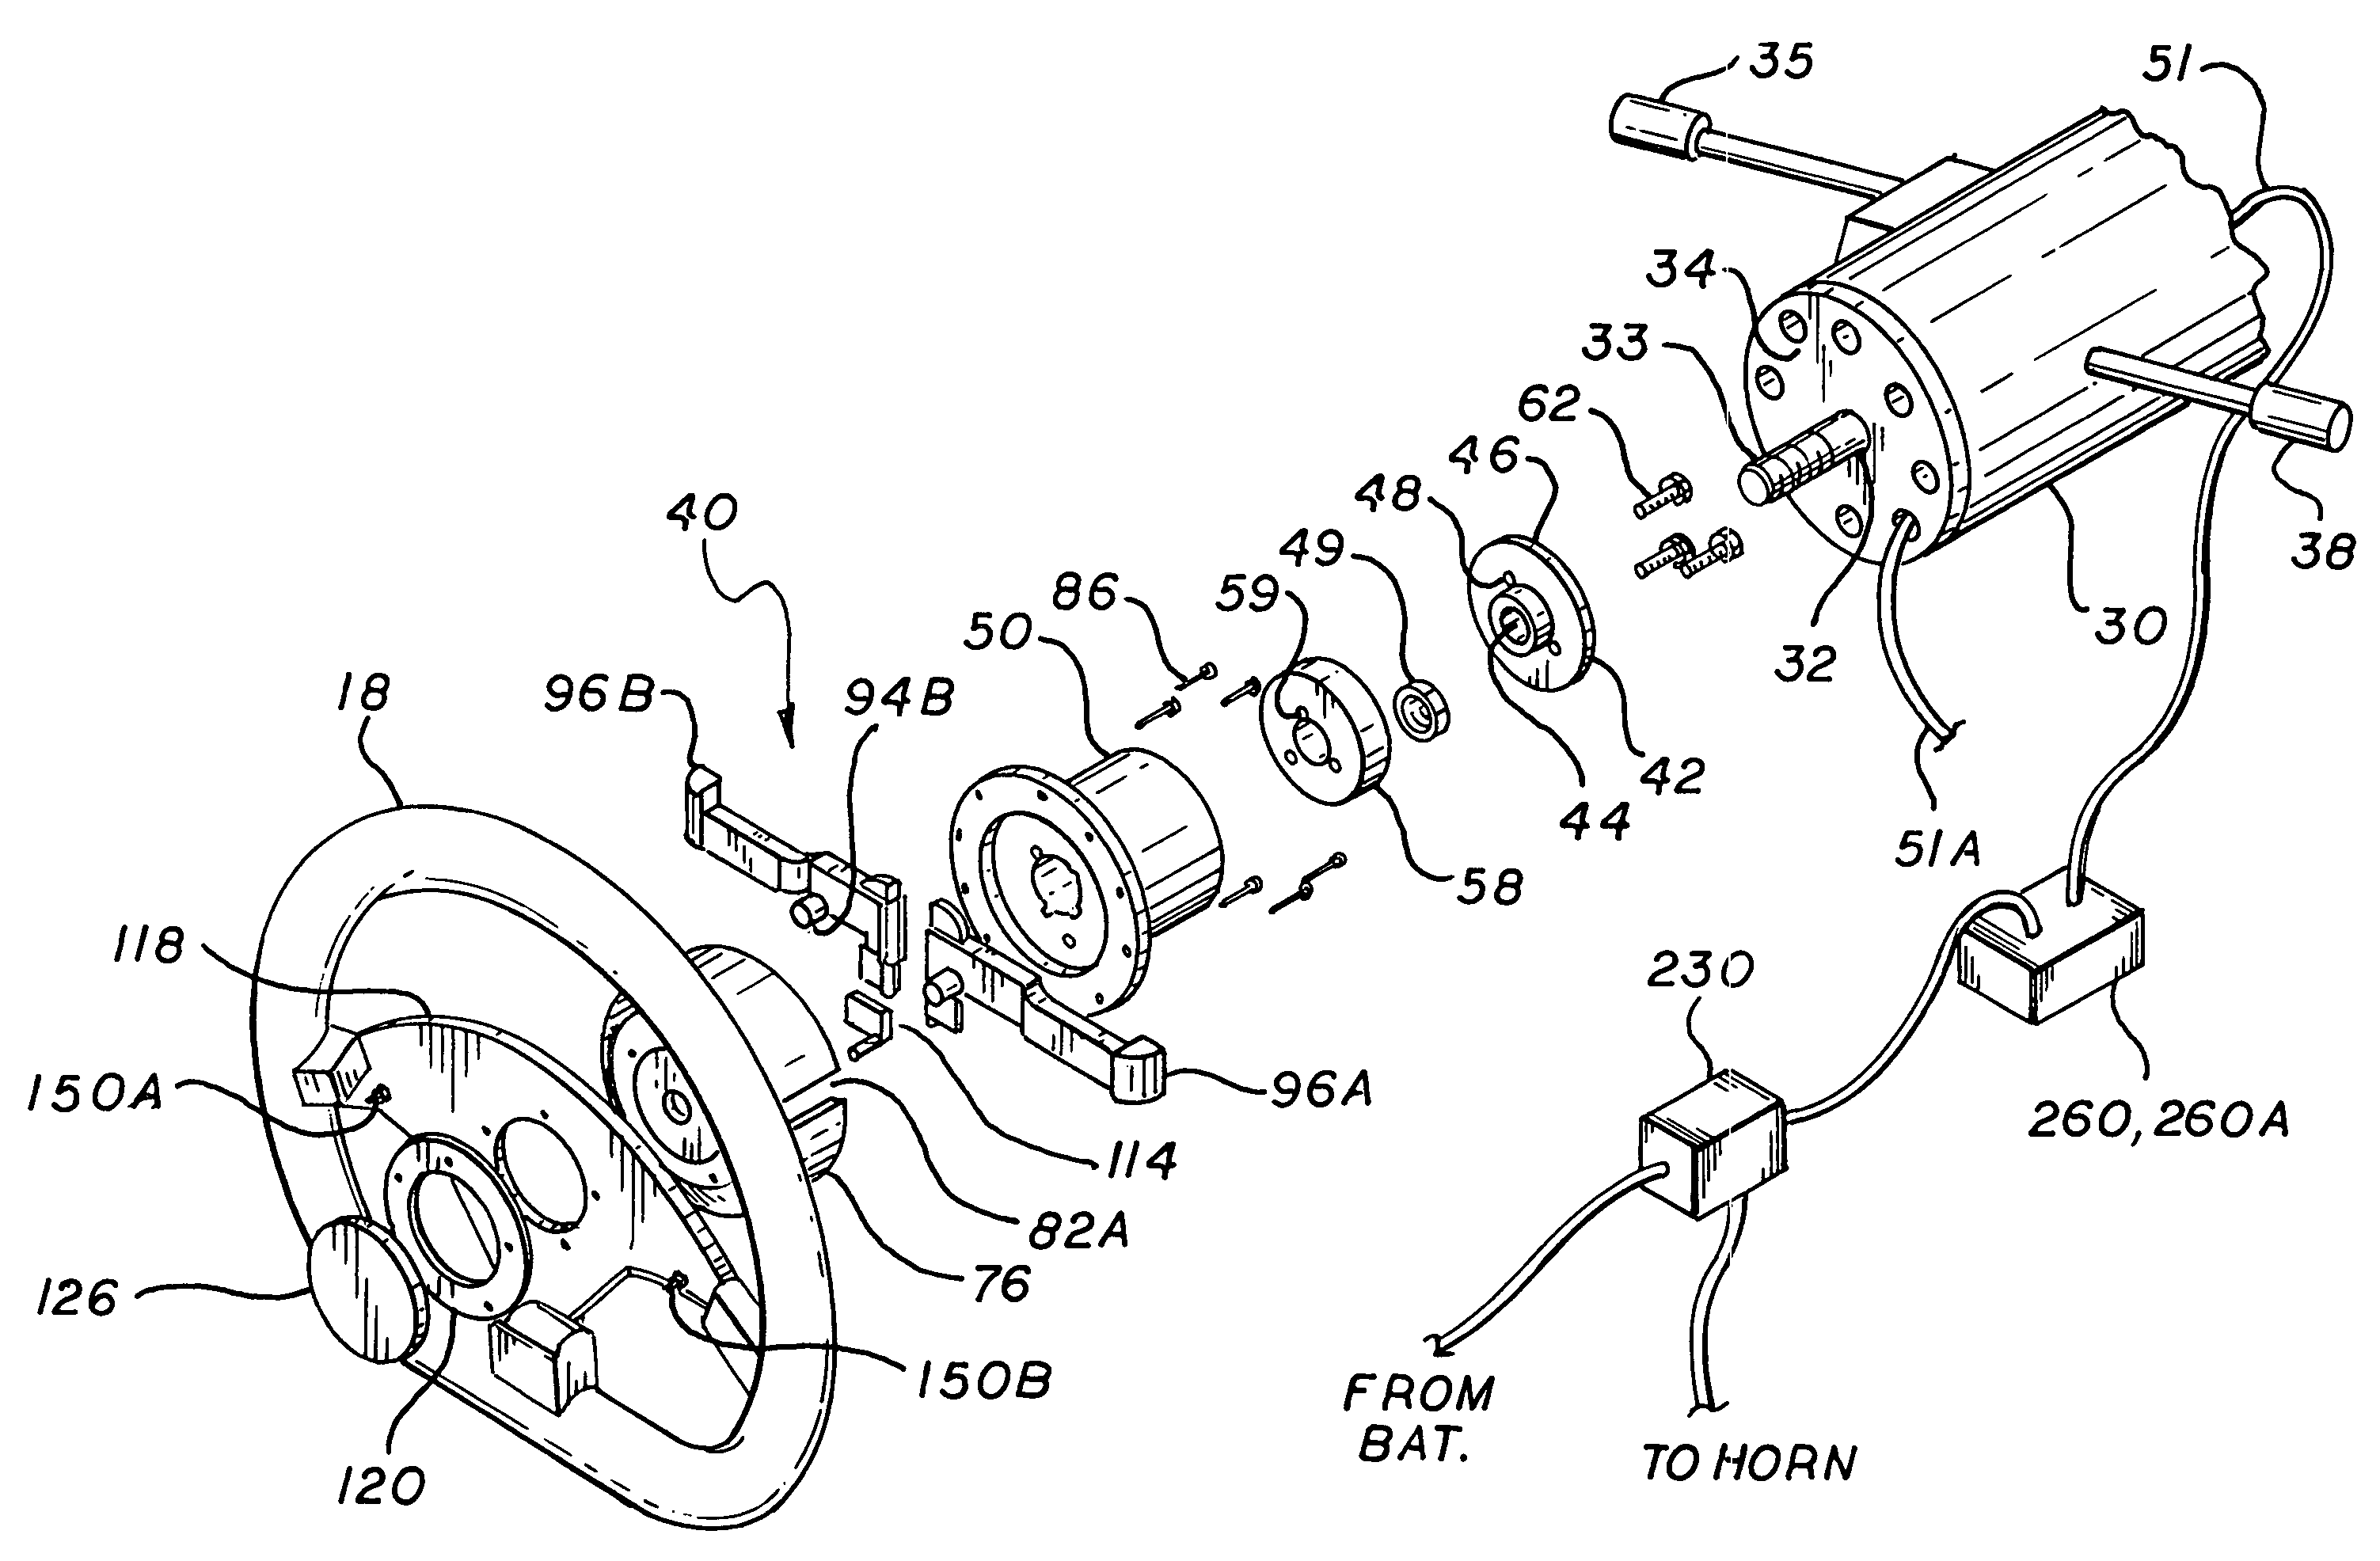 Shifting system for an automobile automatic transmission